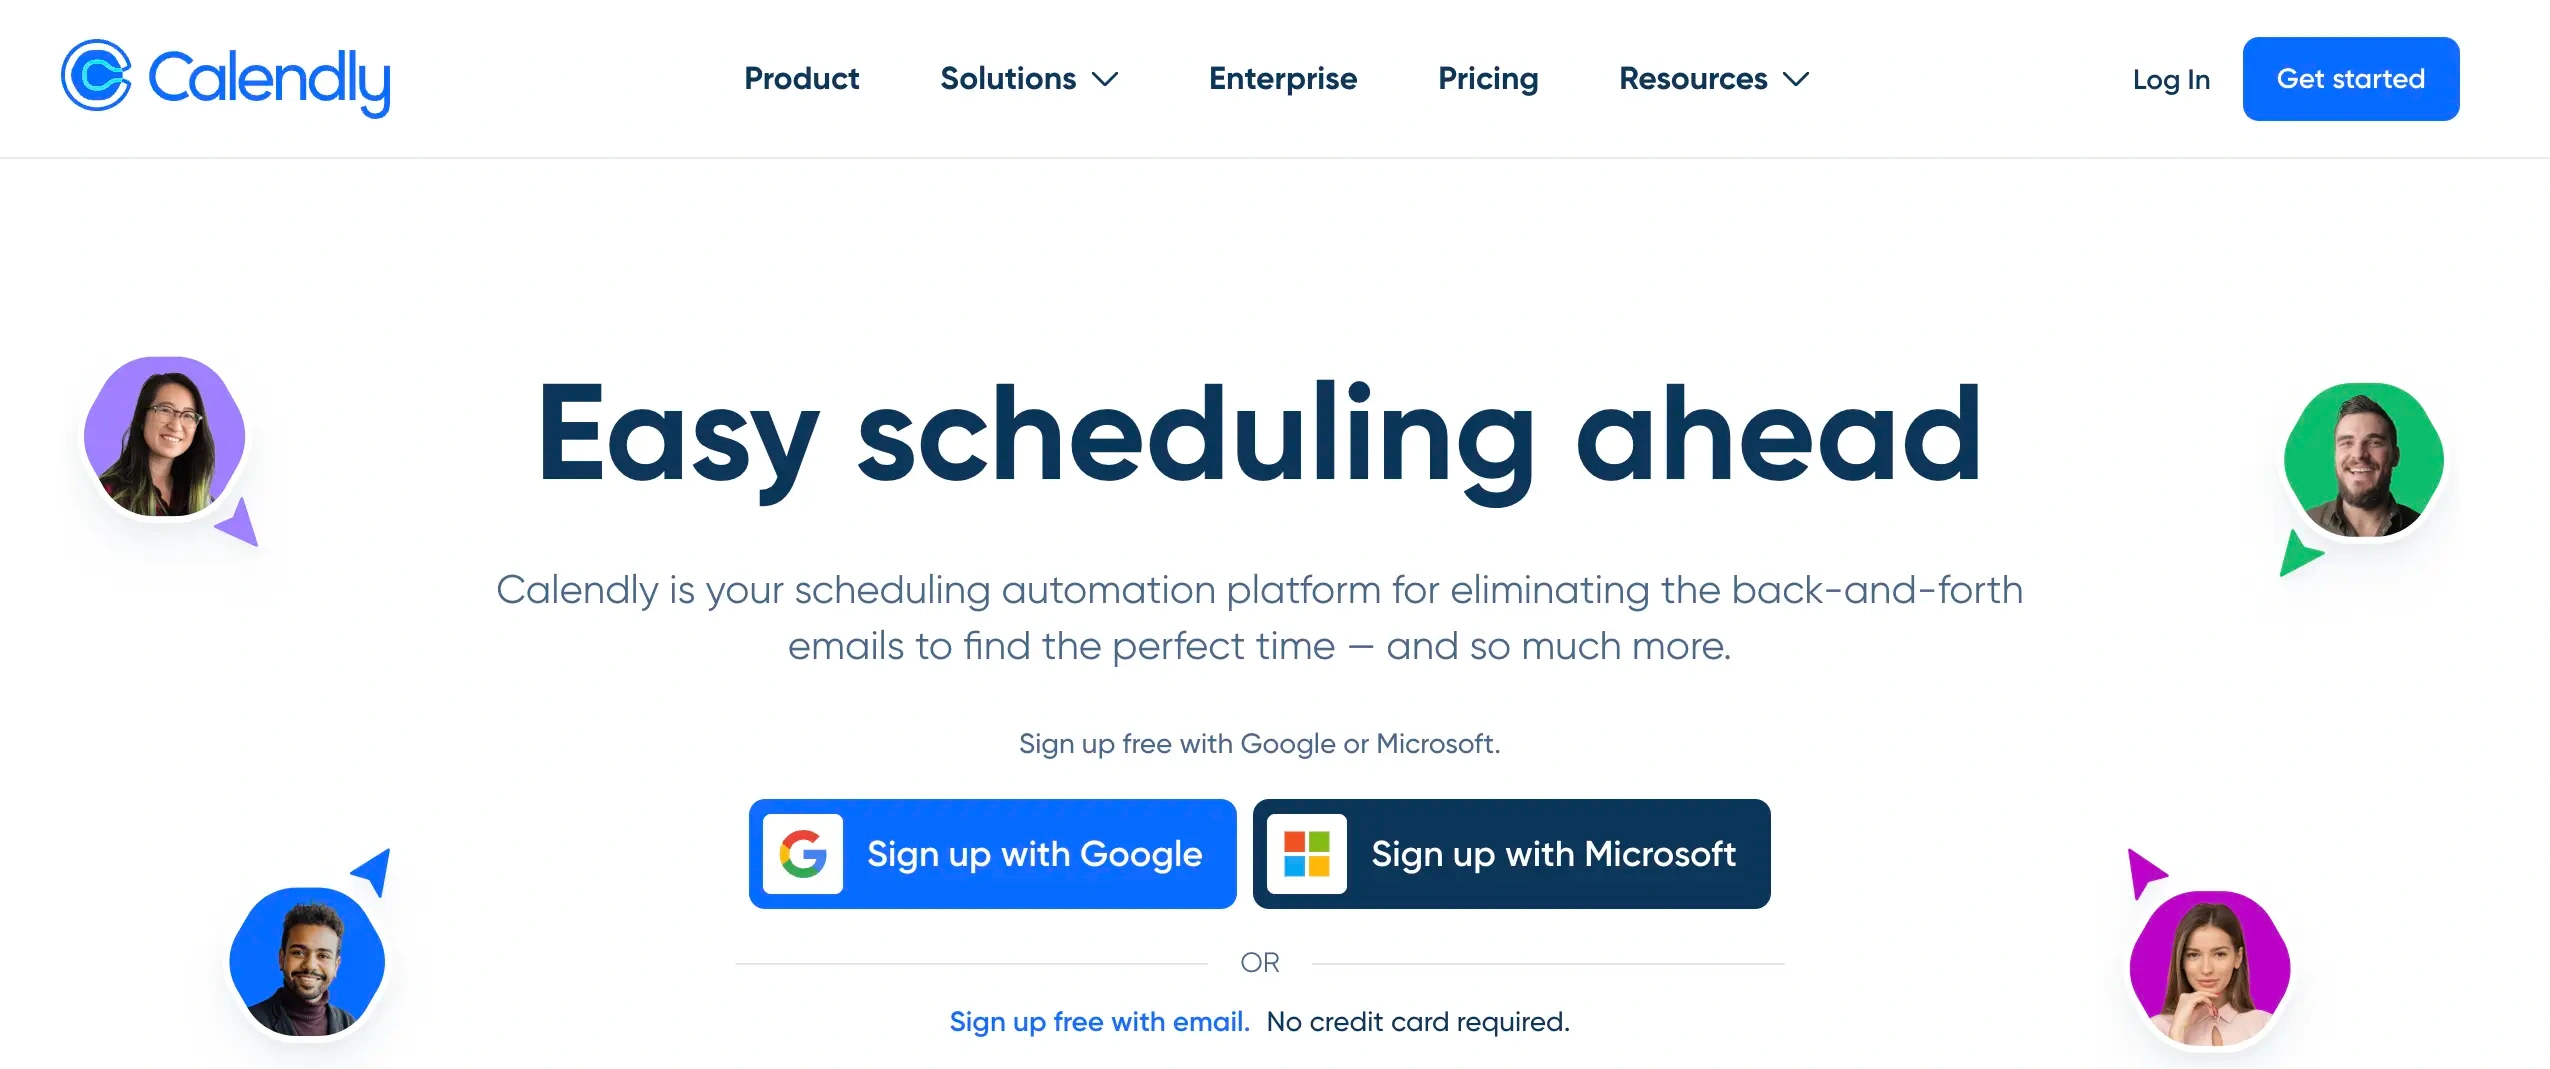 Calendly Landing Page